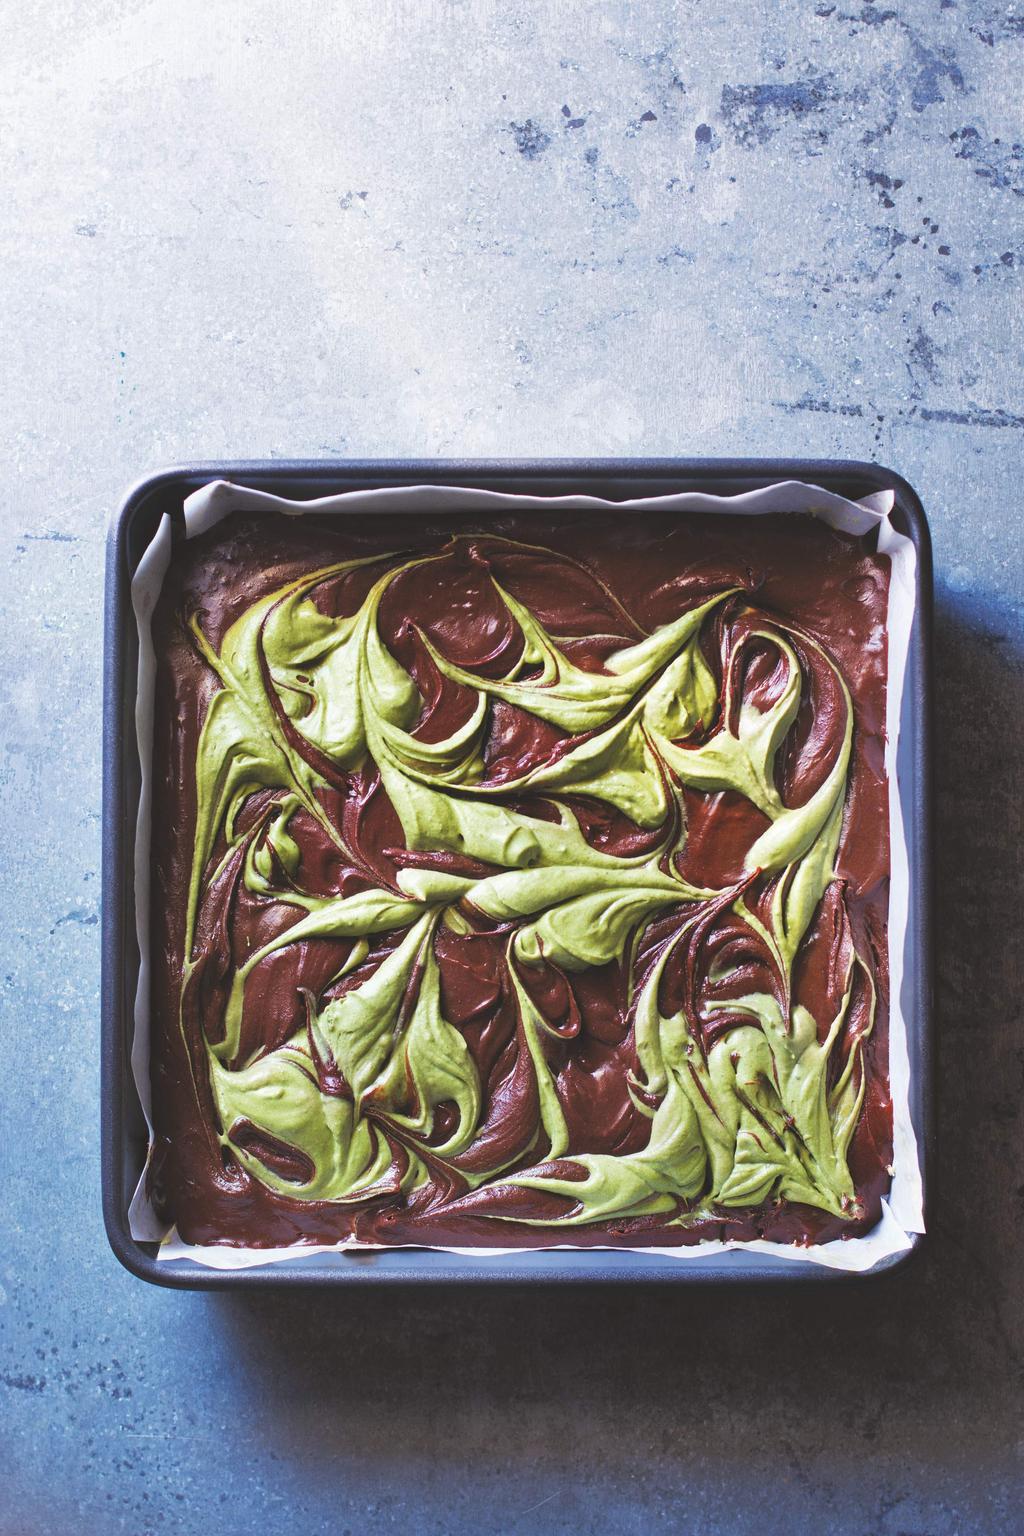 MATCHA BROWNIES 25 MINS 1 HOUR 14 BROWNIES - 1 cup of walnuts (or choice of your own) - ½ cup of almond butter - ½ cup of maple syrup - 6 pitted dates - ½ cup of slendertoxtea cocoa powder - 1 tsp